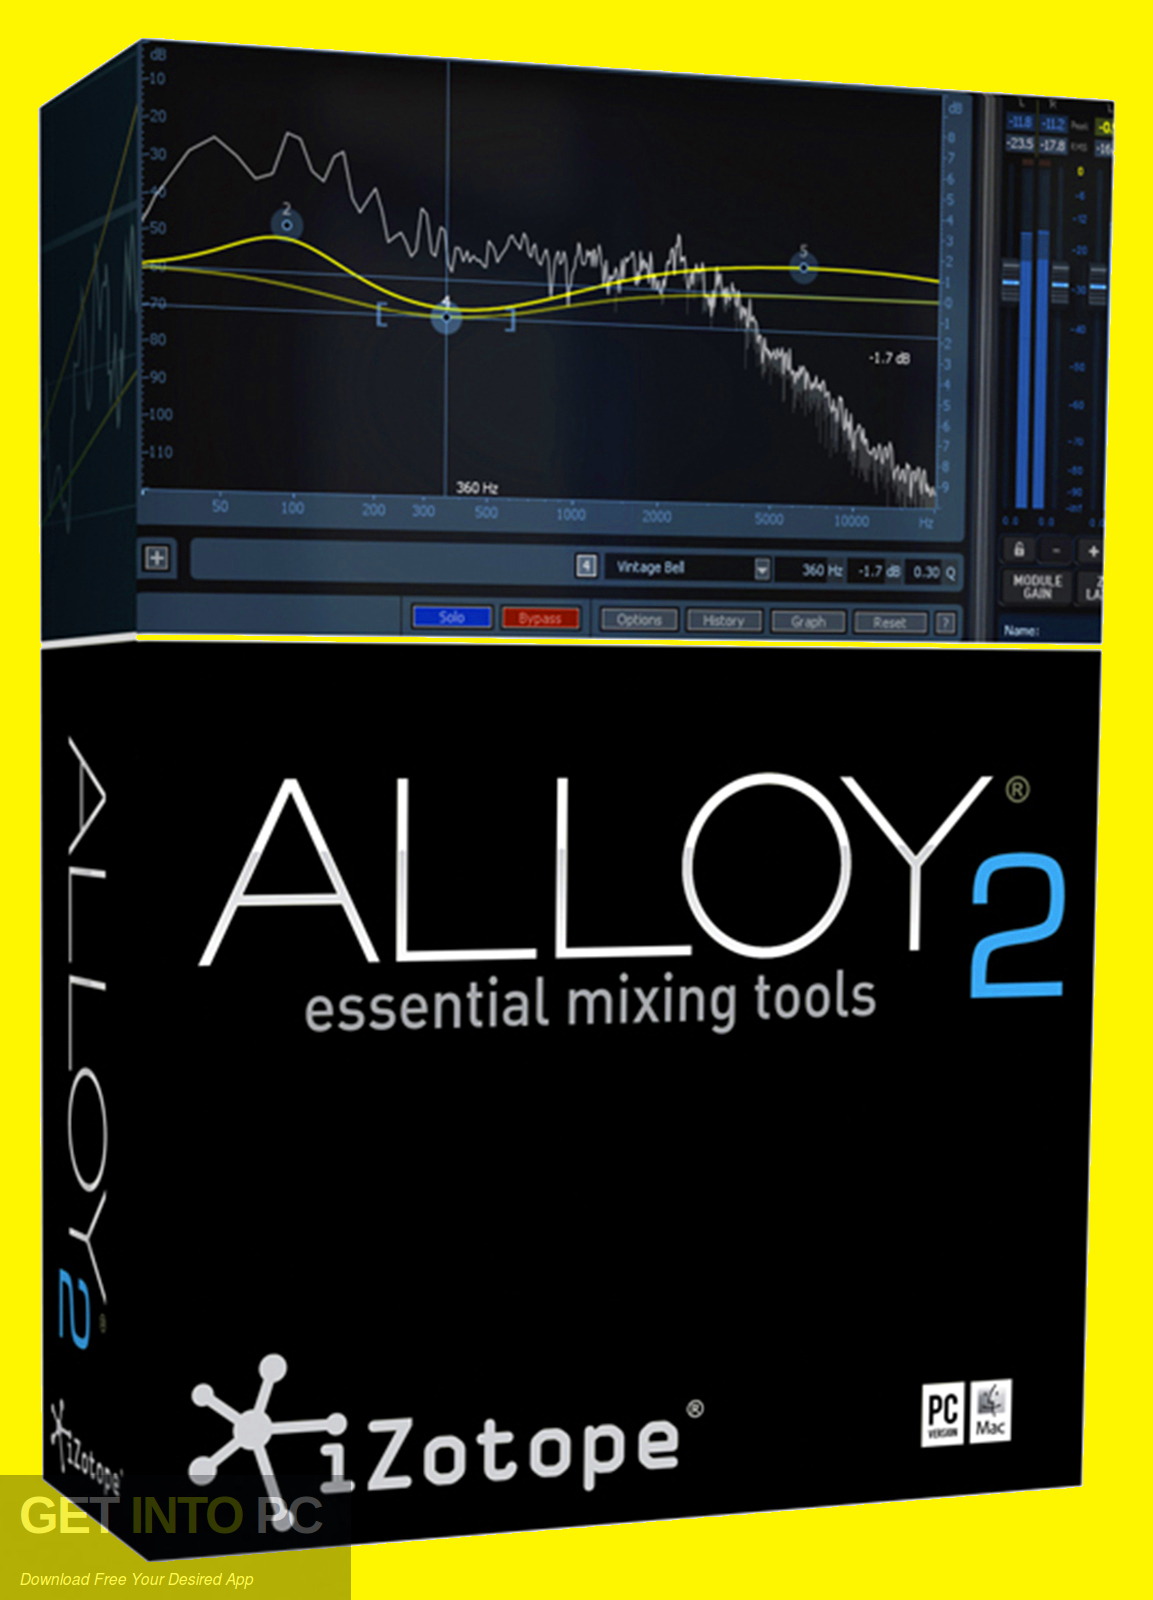 iZotope - Alloy 2 VST Free Download-GetintoPC.com